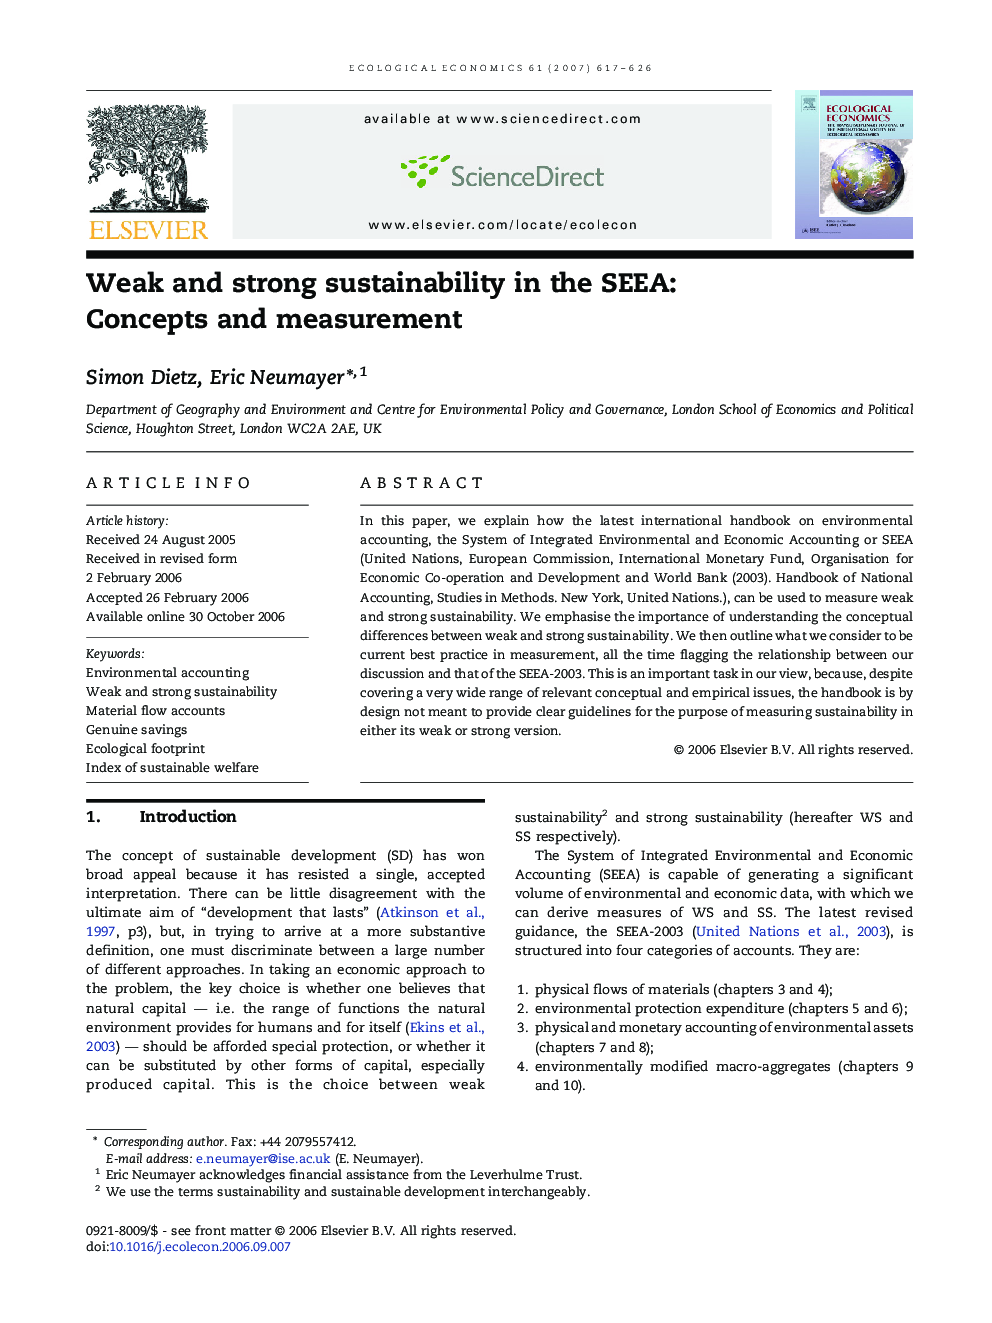 Weak and strong sustainability in the SEEA: Concepts and measurement